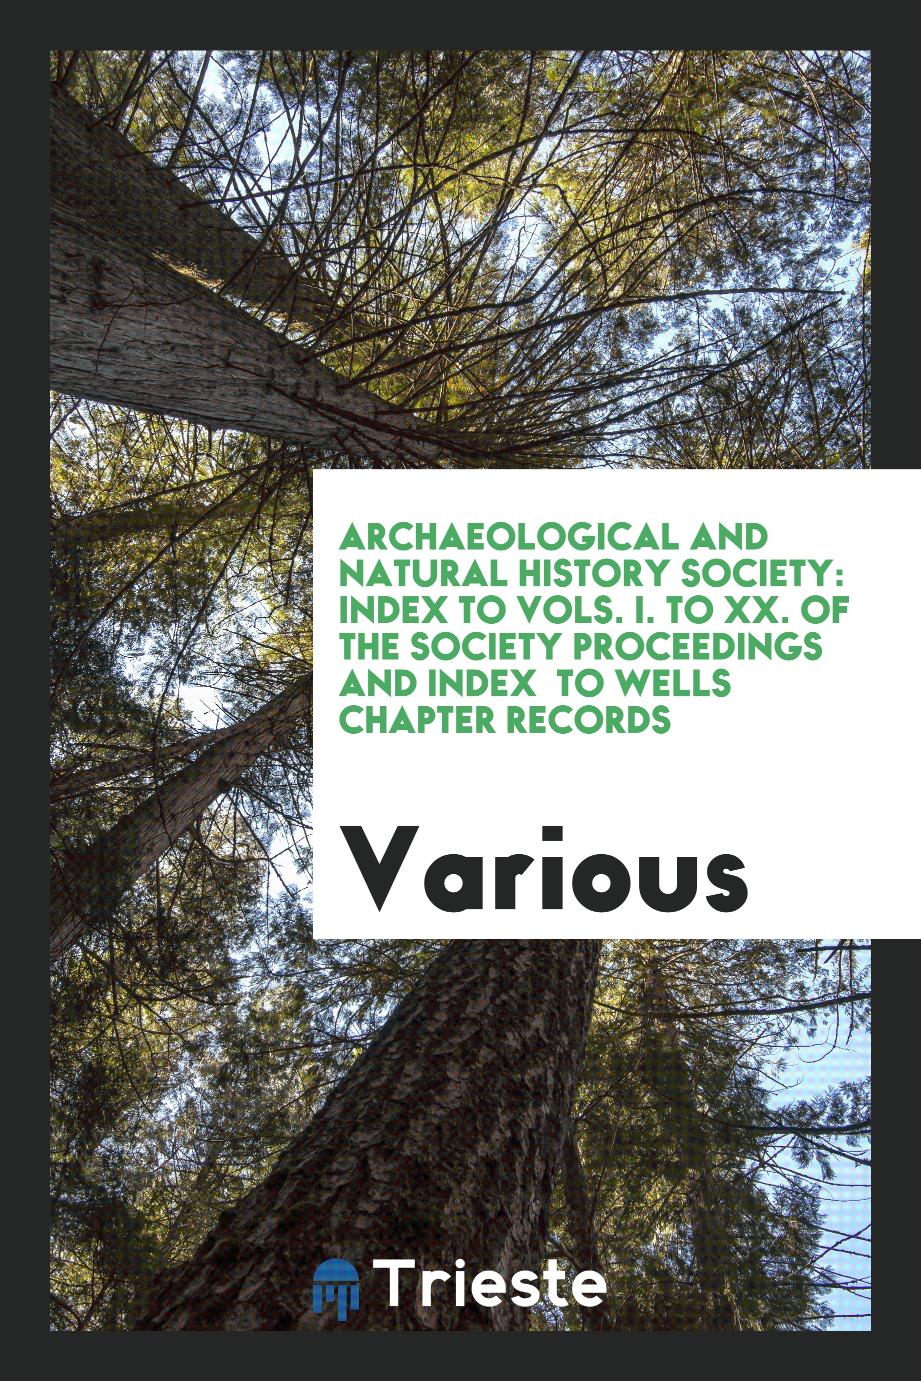 Archaeological and Natural History society: Index to Vols. I. to XX. of the Society proceedings and Index to Wells Chapter Records